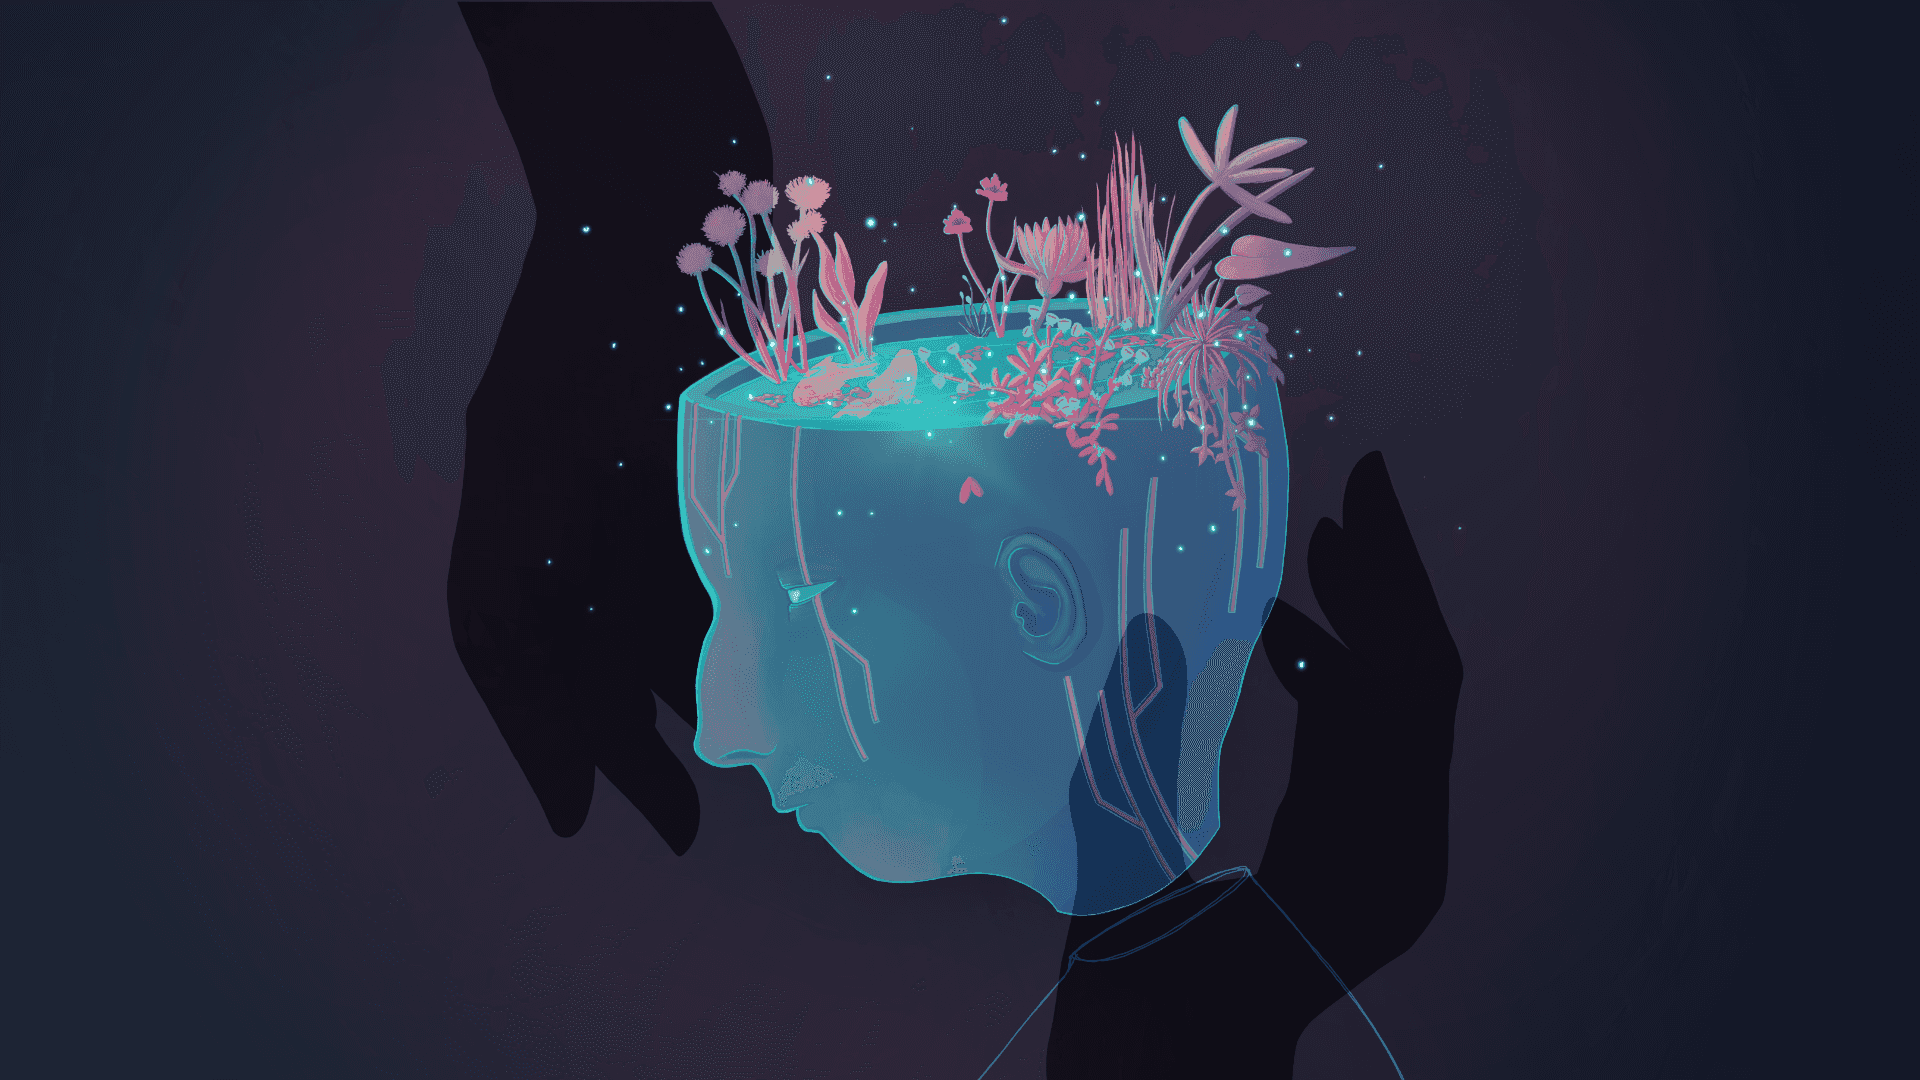 A glowing pool of blue liquid surrounded by pink flora sits inside a levitating blue head as shadow hands move towards it.